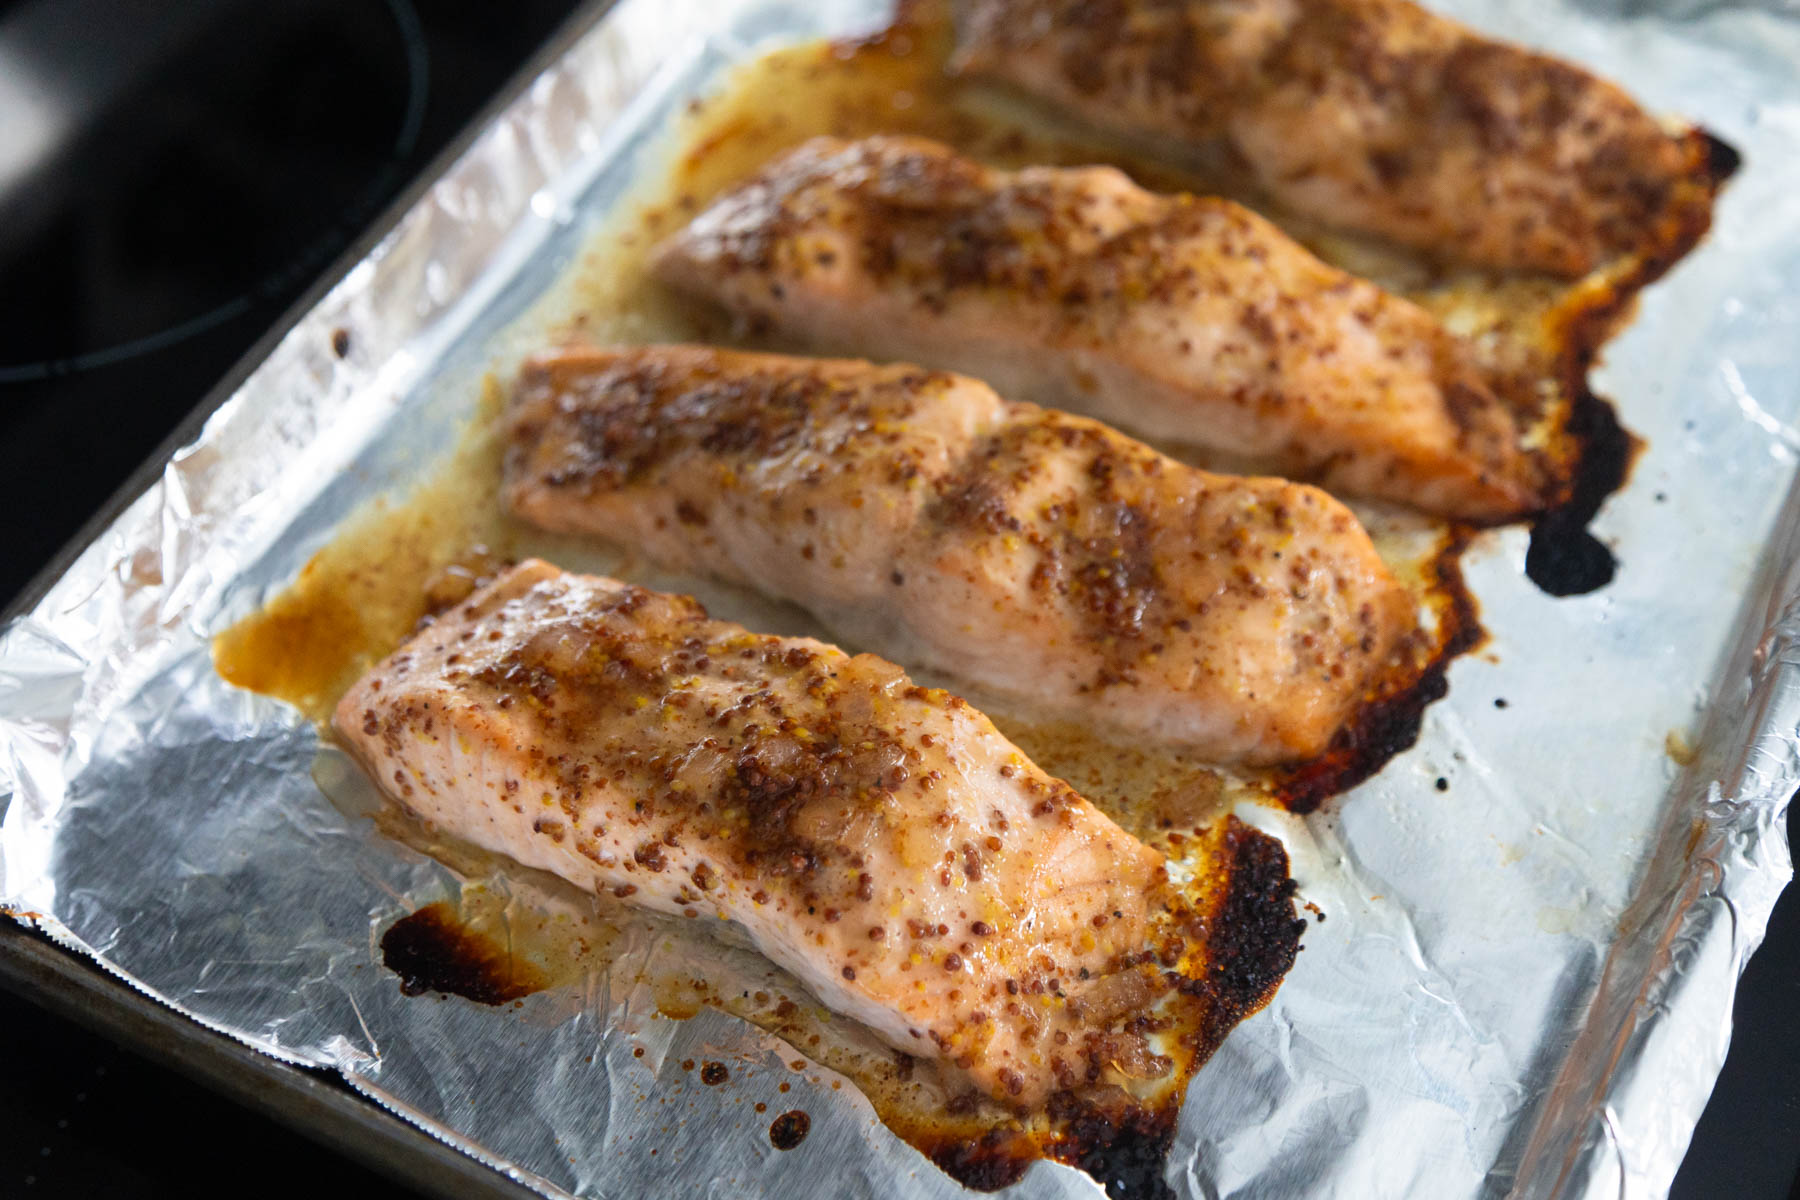 The broiled salmon filets are cooling on the stovetop. They have a golden brown edge.